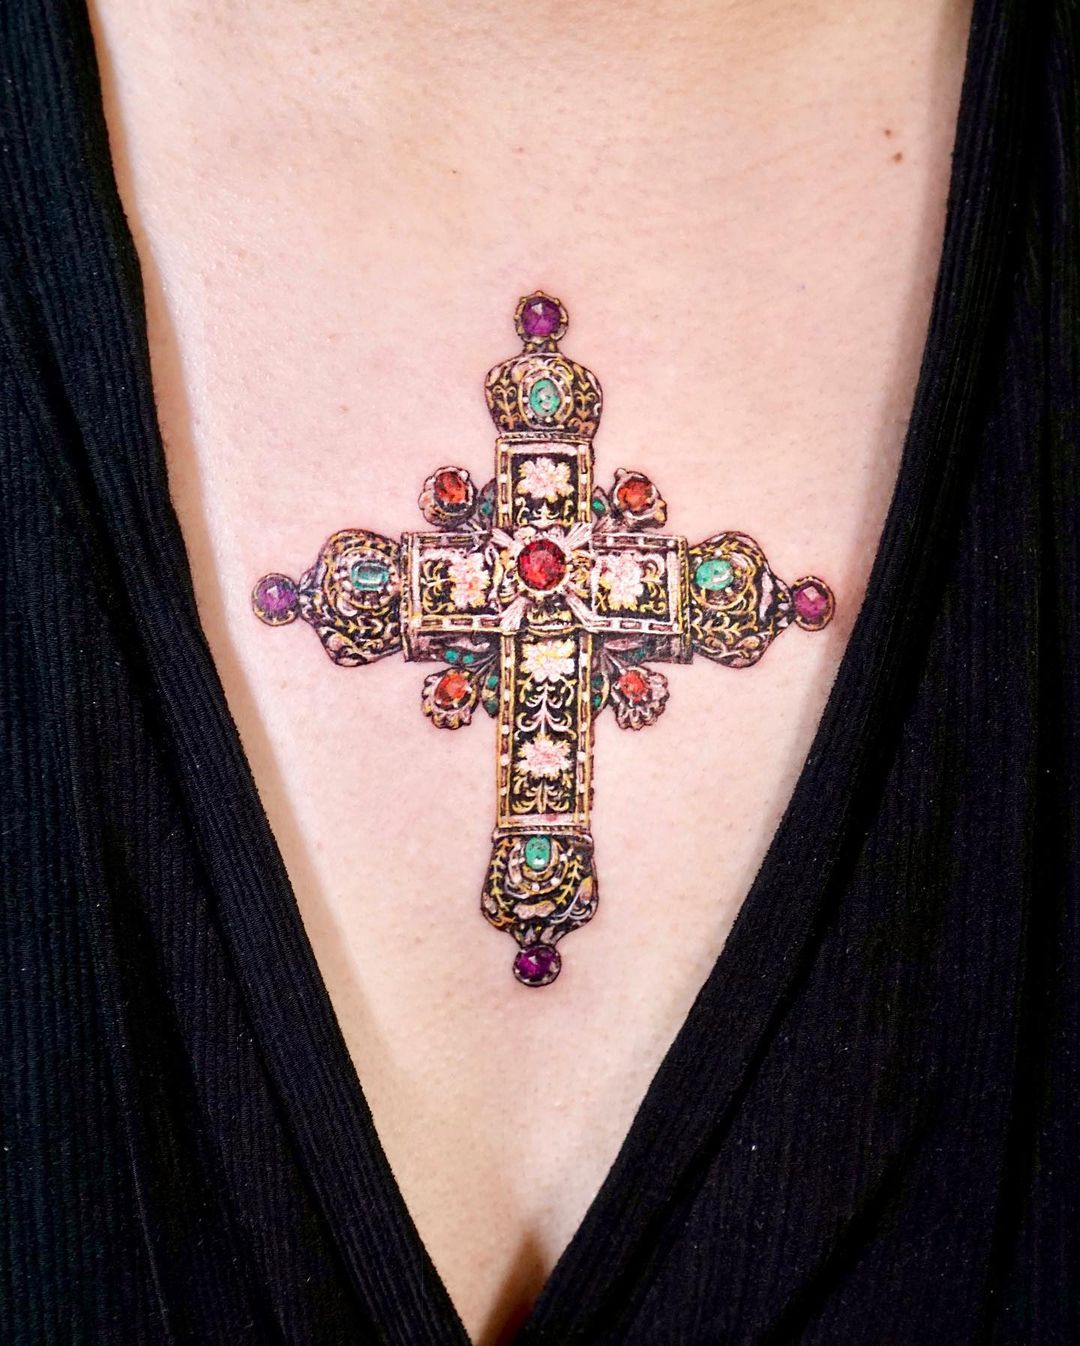 Unique Stone Embedded Sternum Cross Tattoo For Women